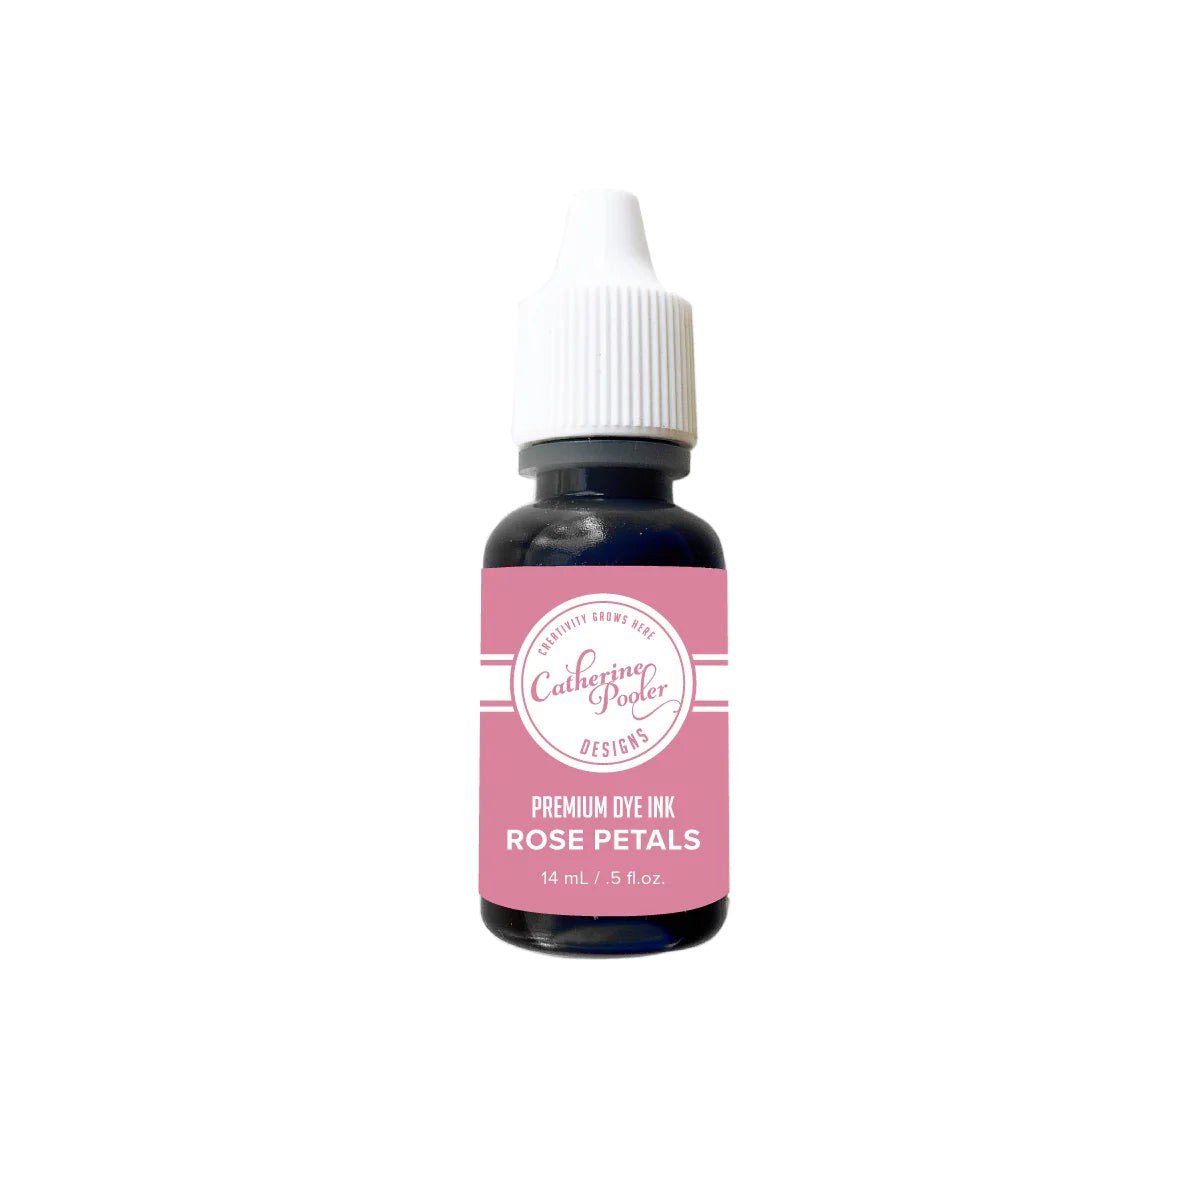 Rose Petals Premium Dye Ink Refill - Spa Collection